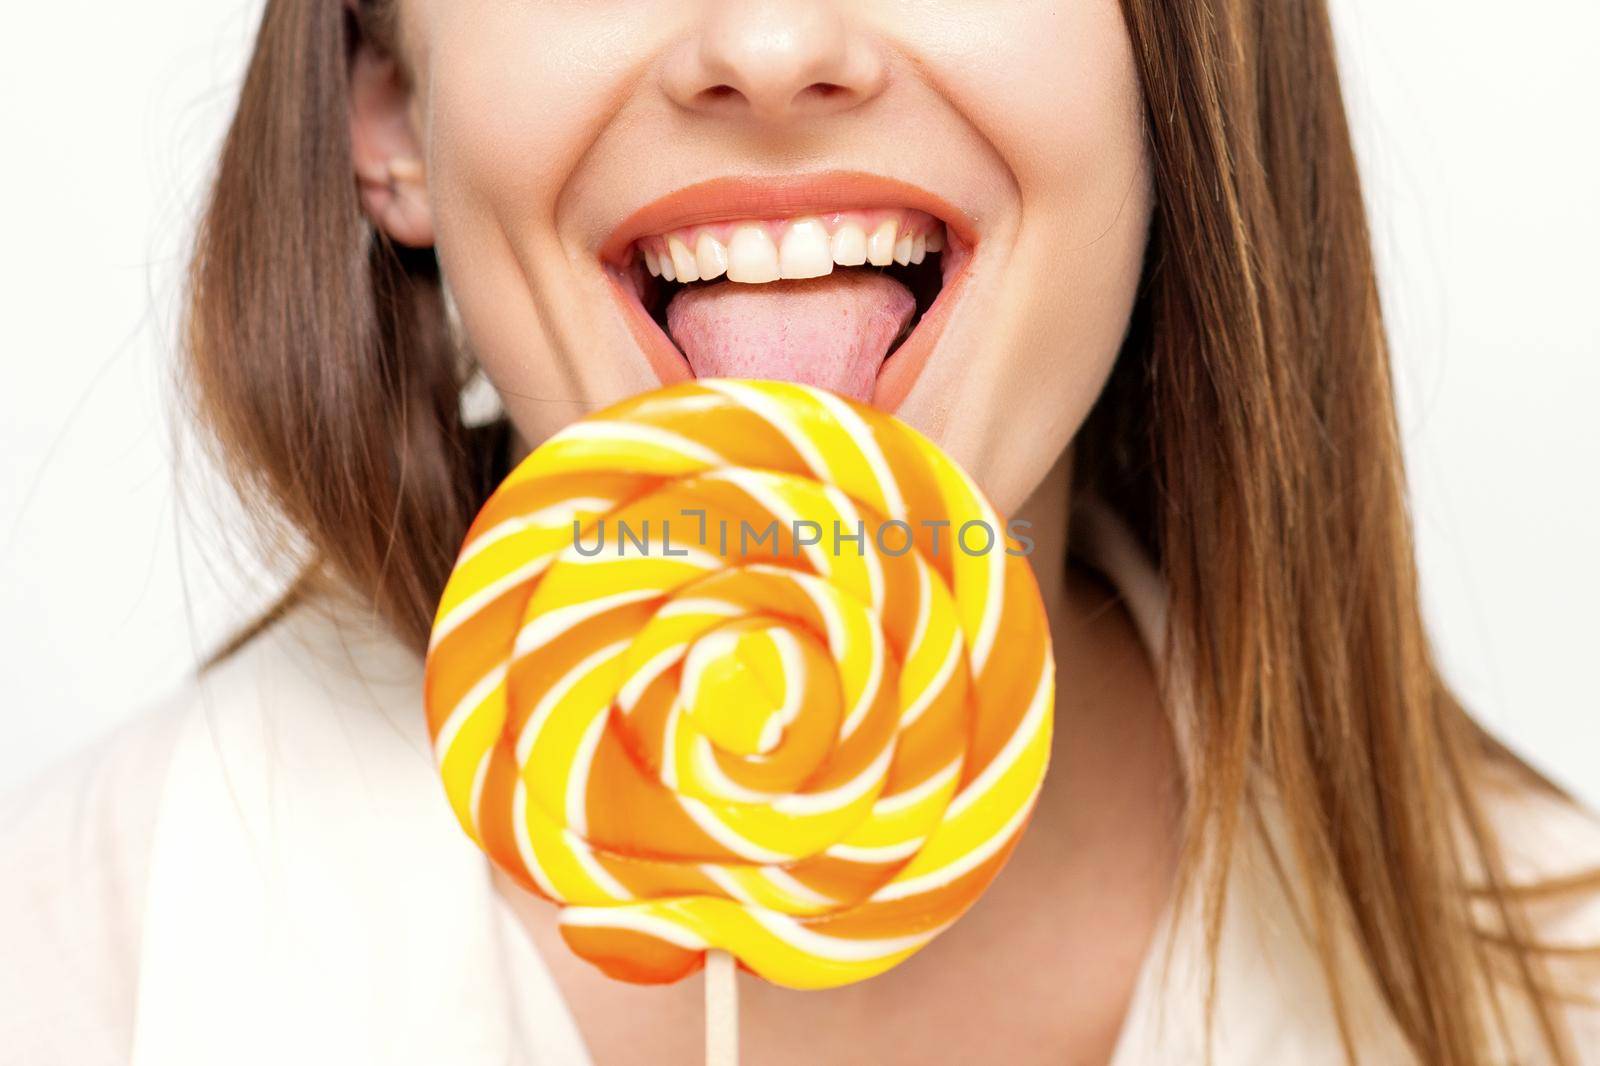 Beautiful young caucasian woman wearing a white shirt licking a lollipop on a white background